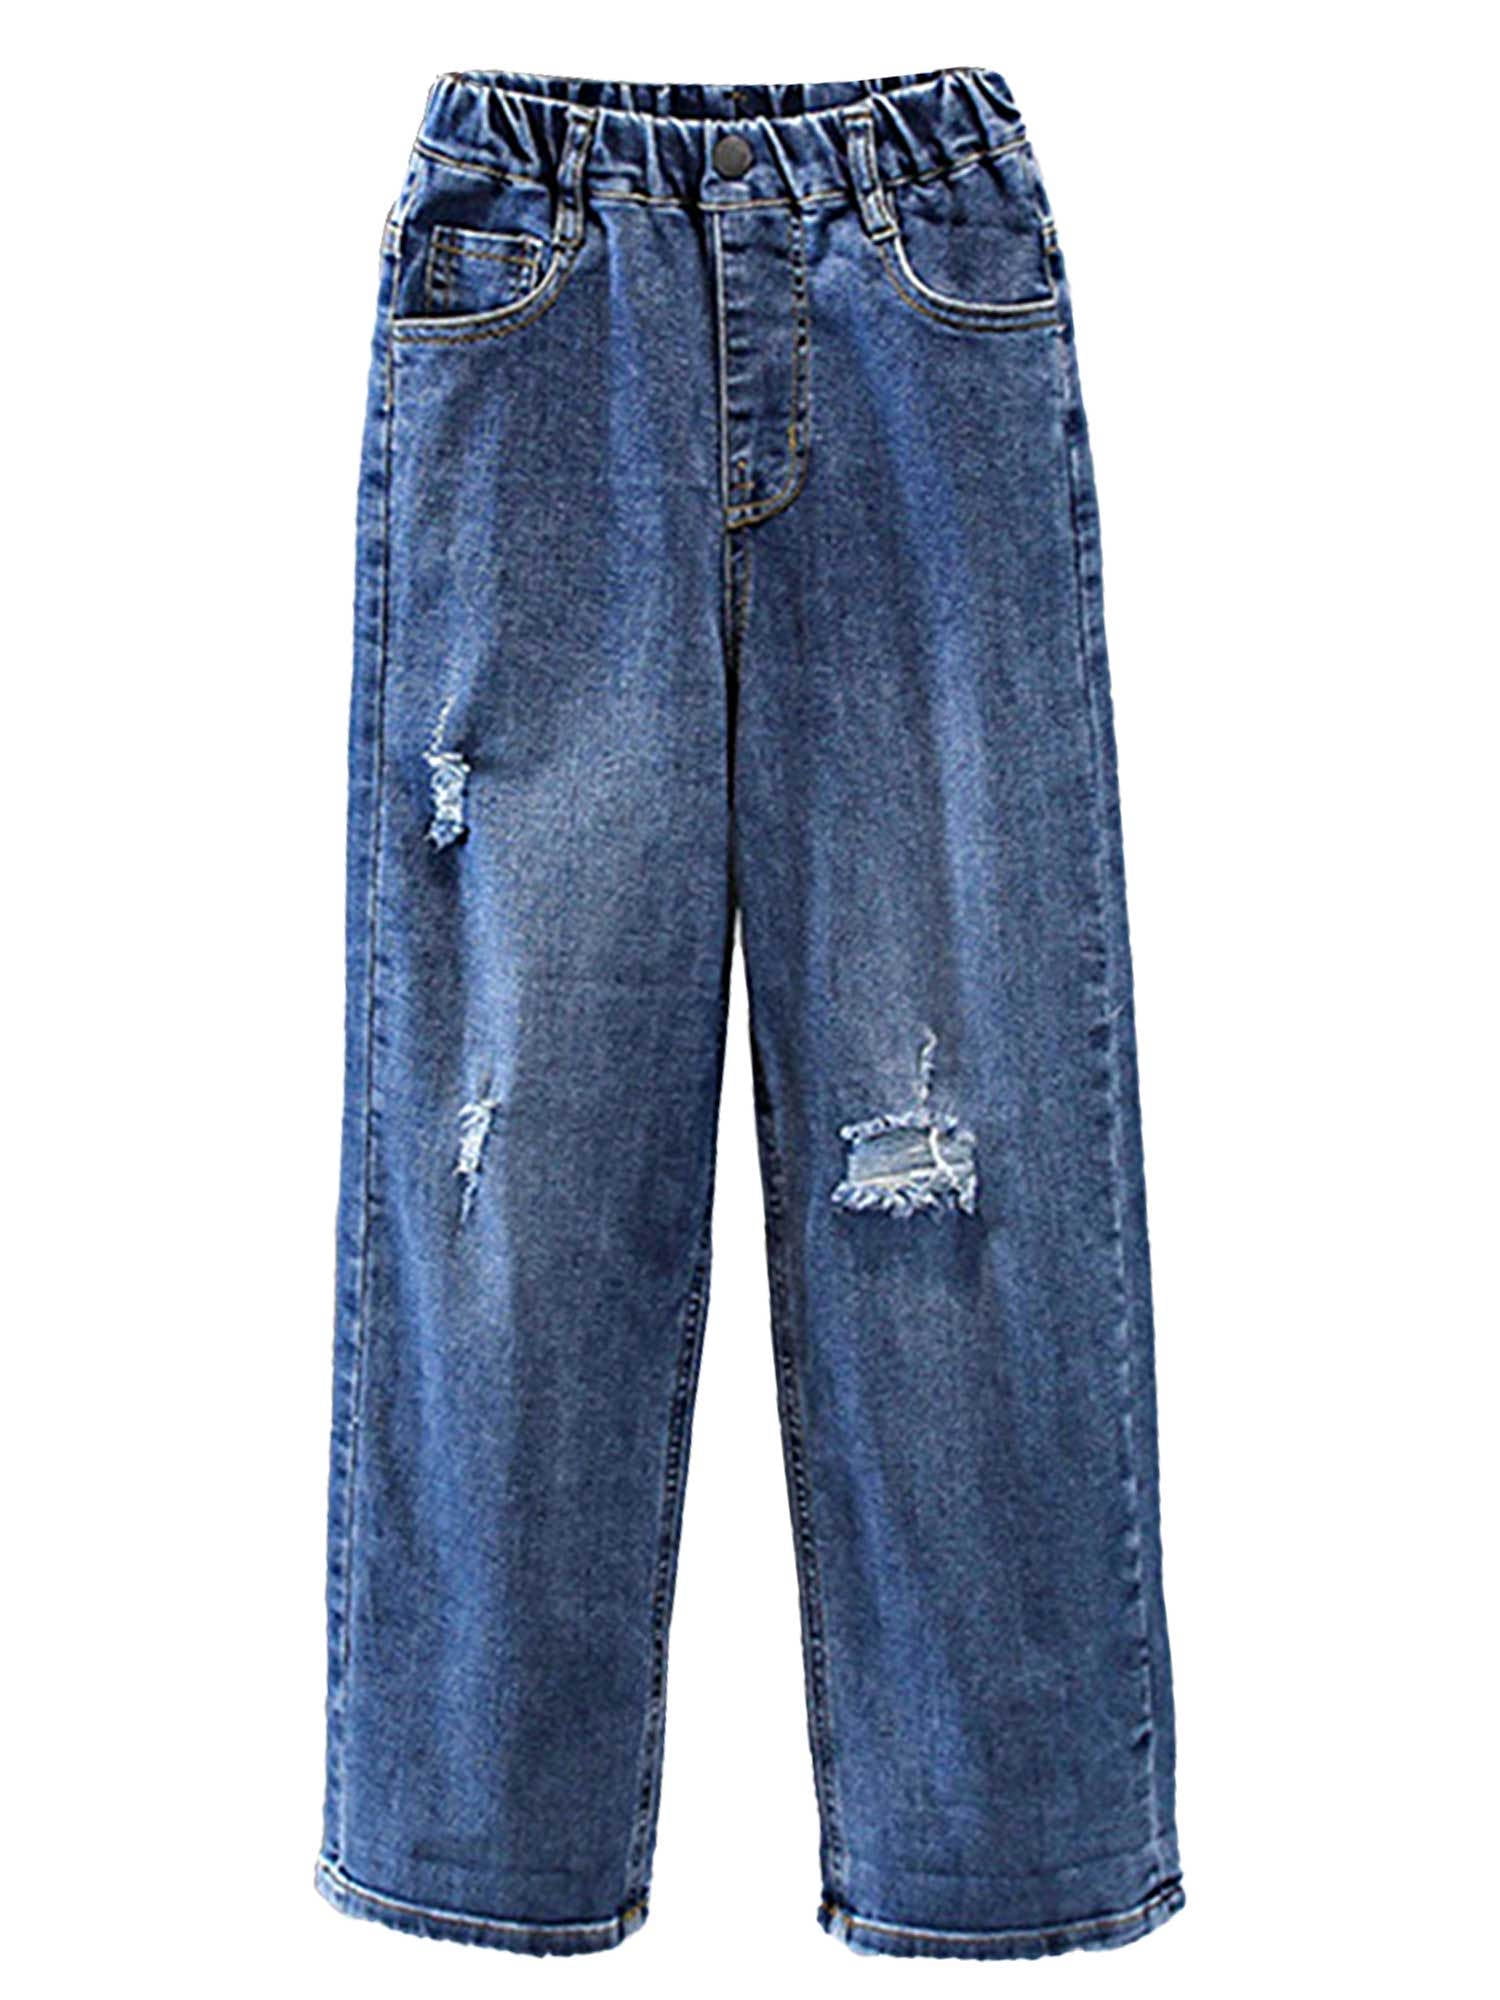 Kids Ripped pocket Girls Leg Multi- Jeans with Wide Pants Casual CHICTRY Denim